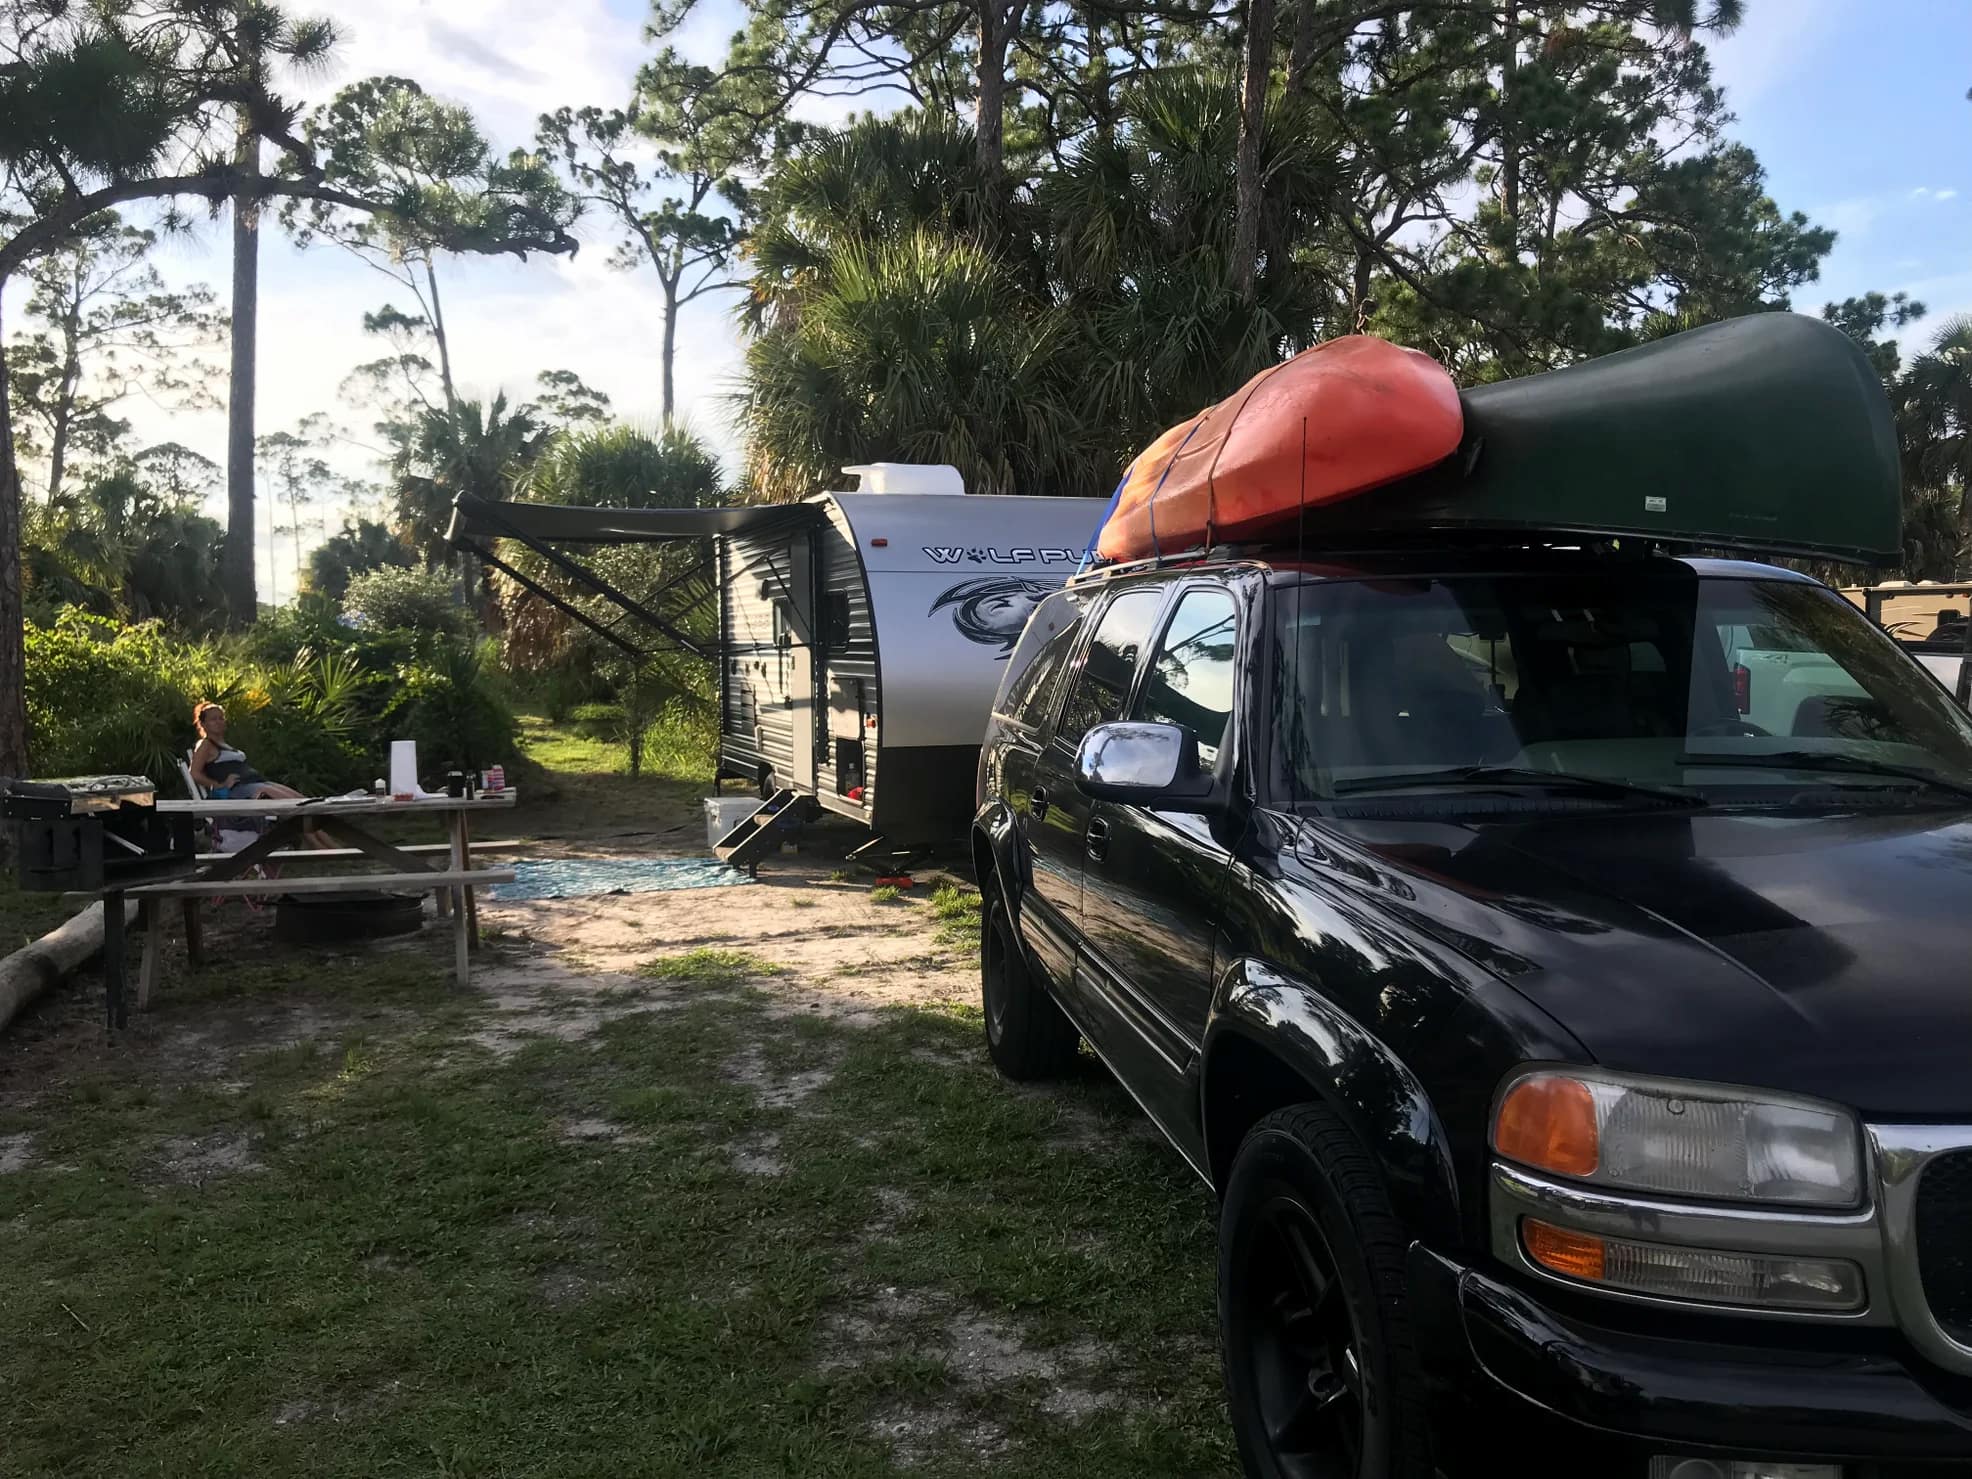 Truck with kayaks on top and trailer behind parked at a forested campsite on the beach in Florida.